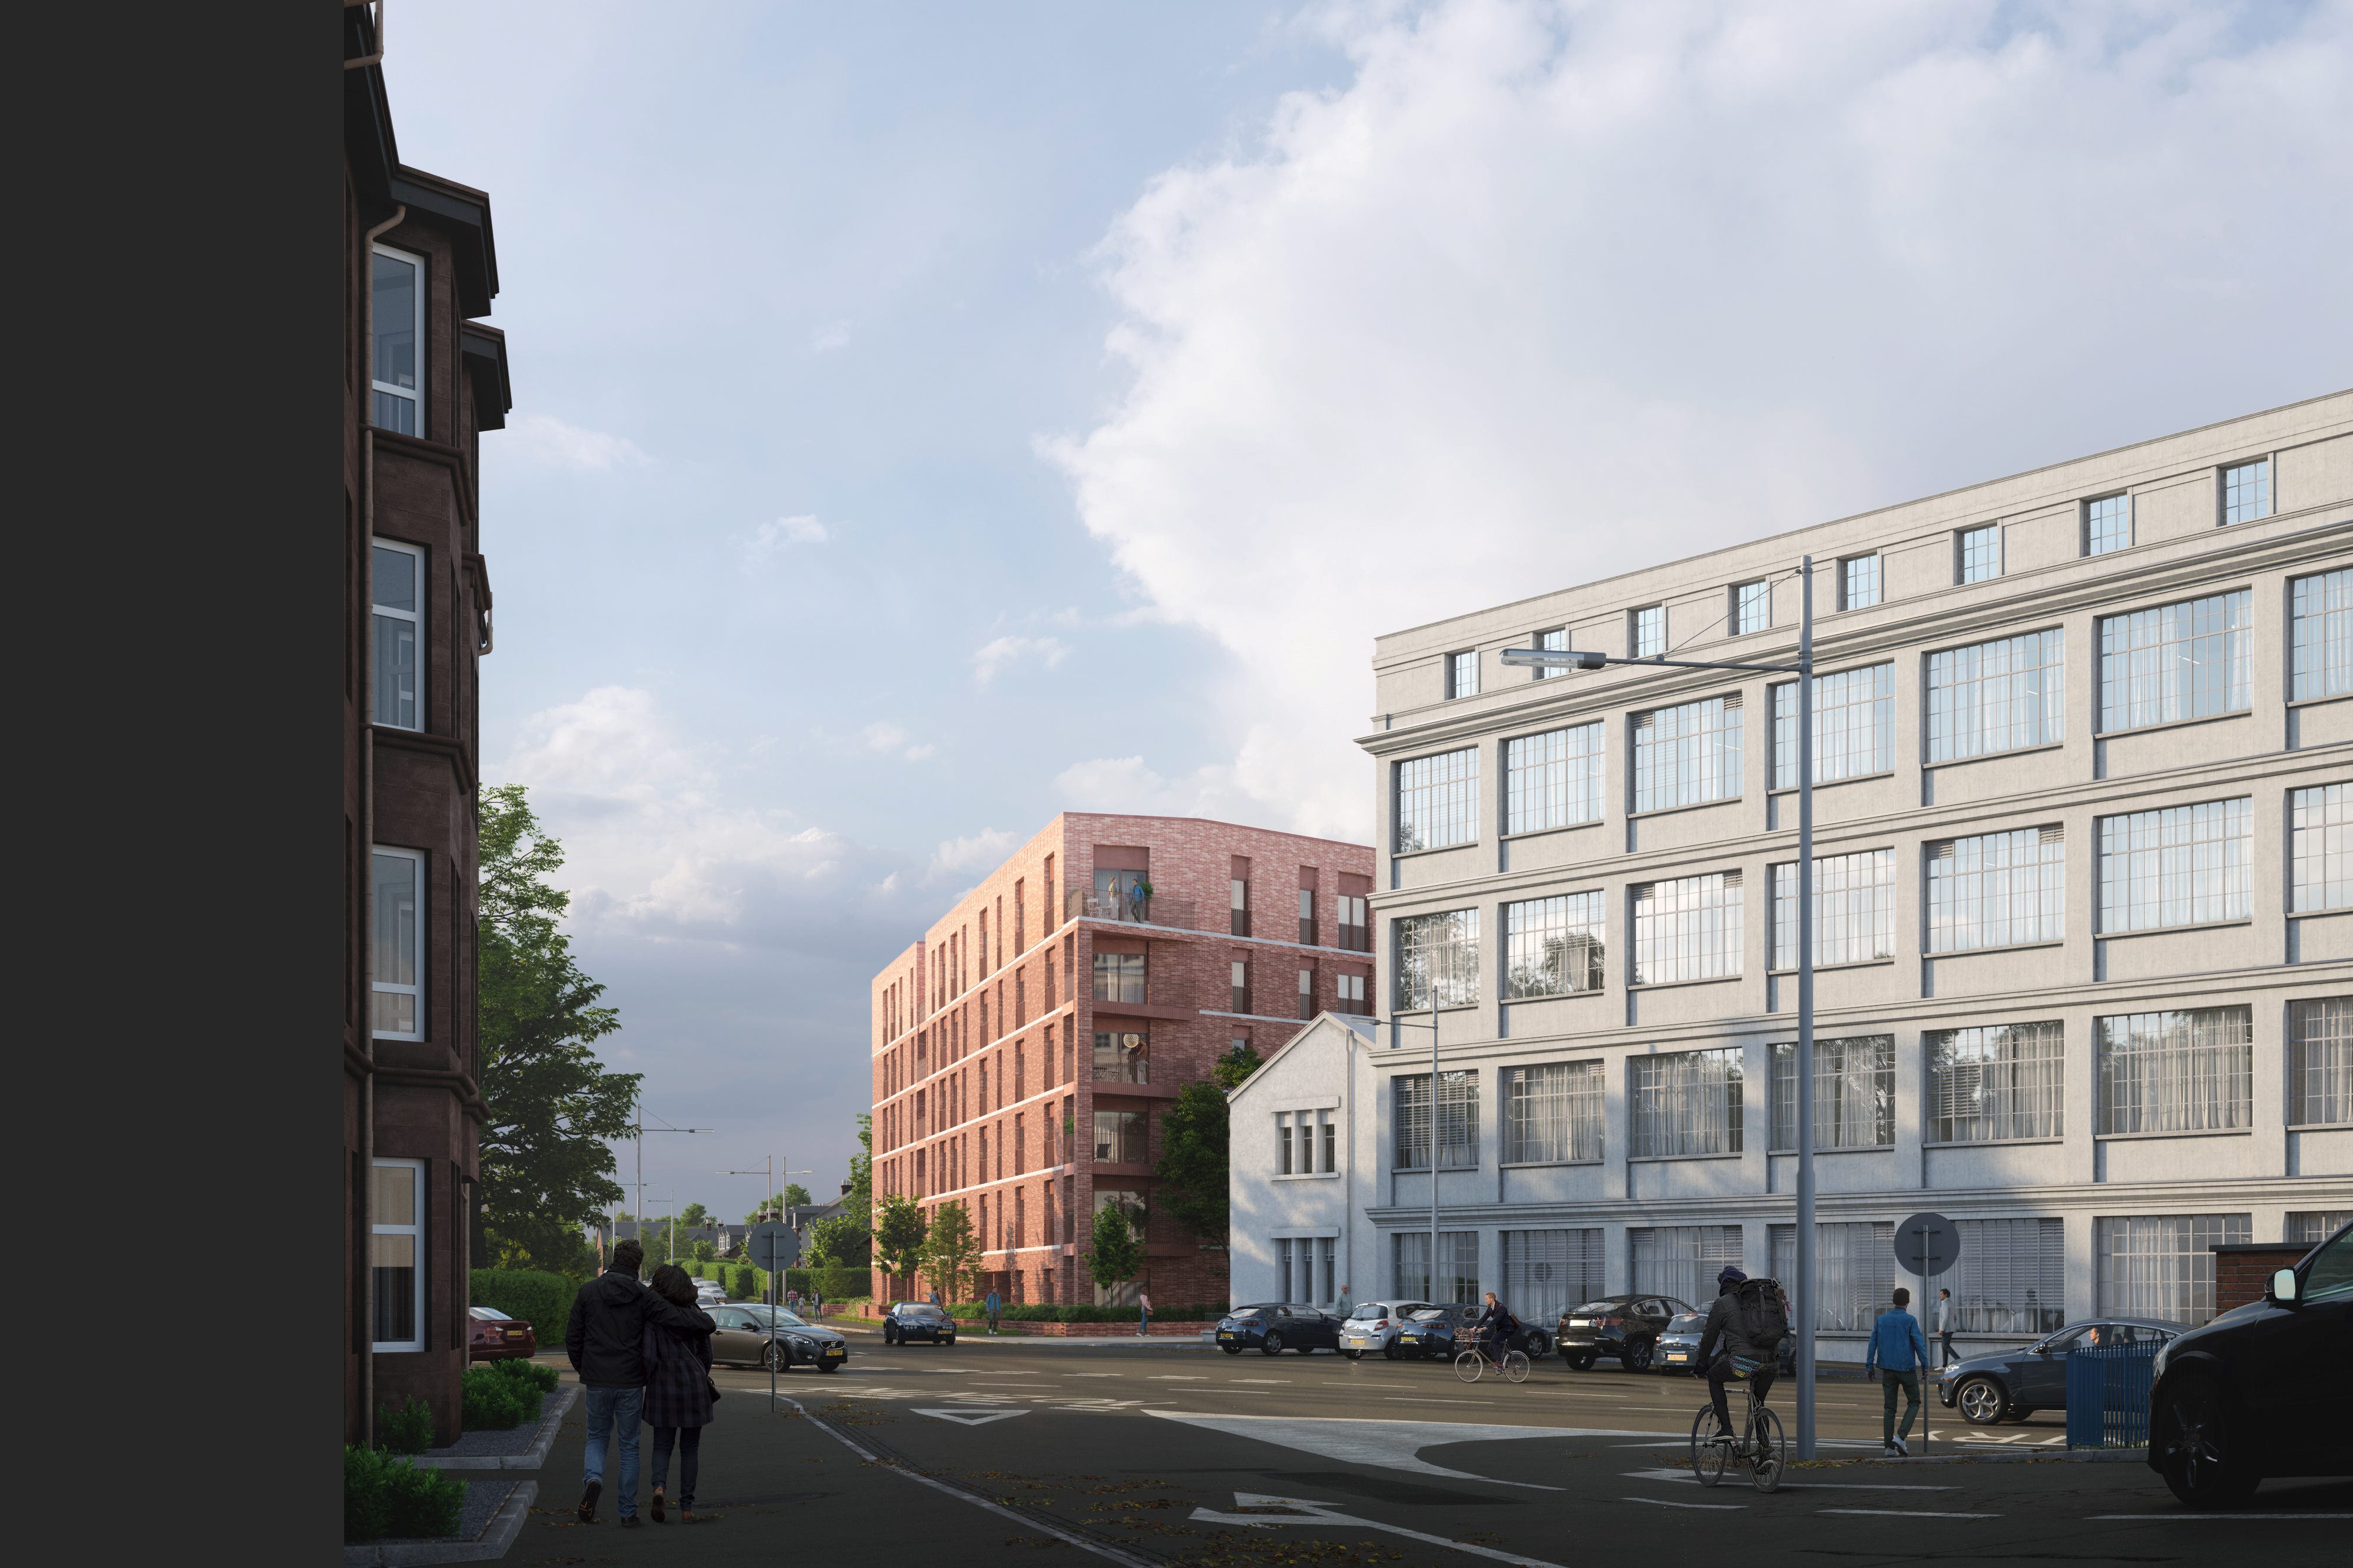 Cala Homes submits plans for 227 new apartments in Cathcart